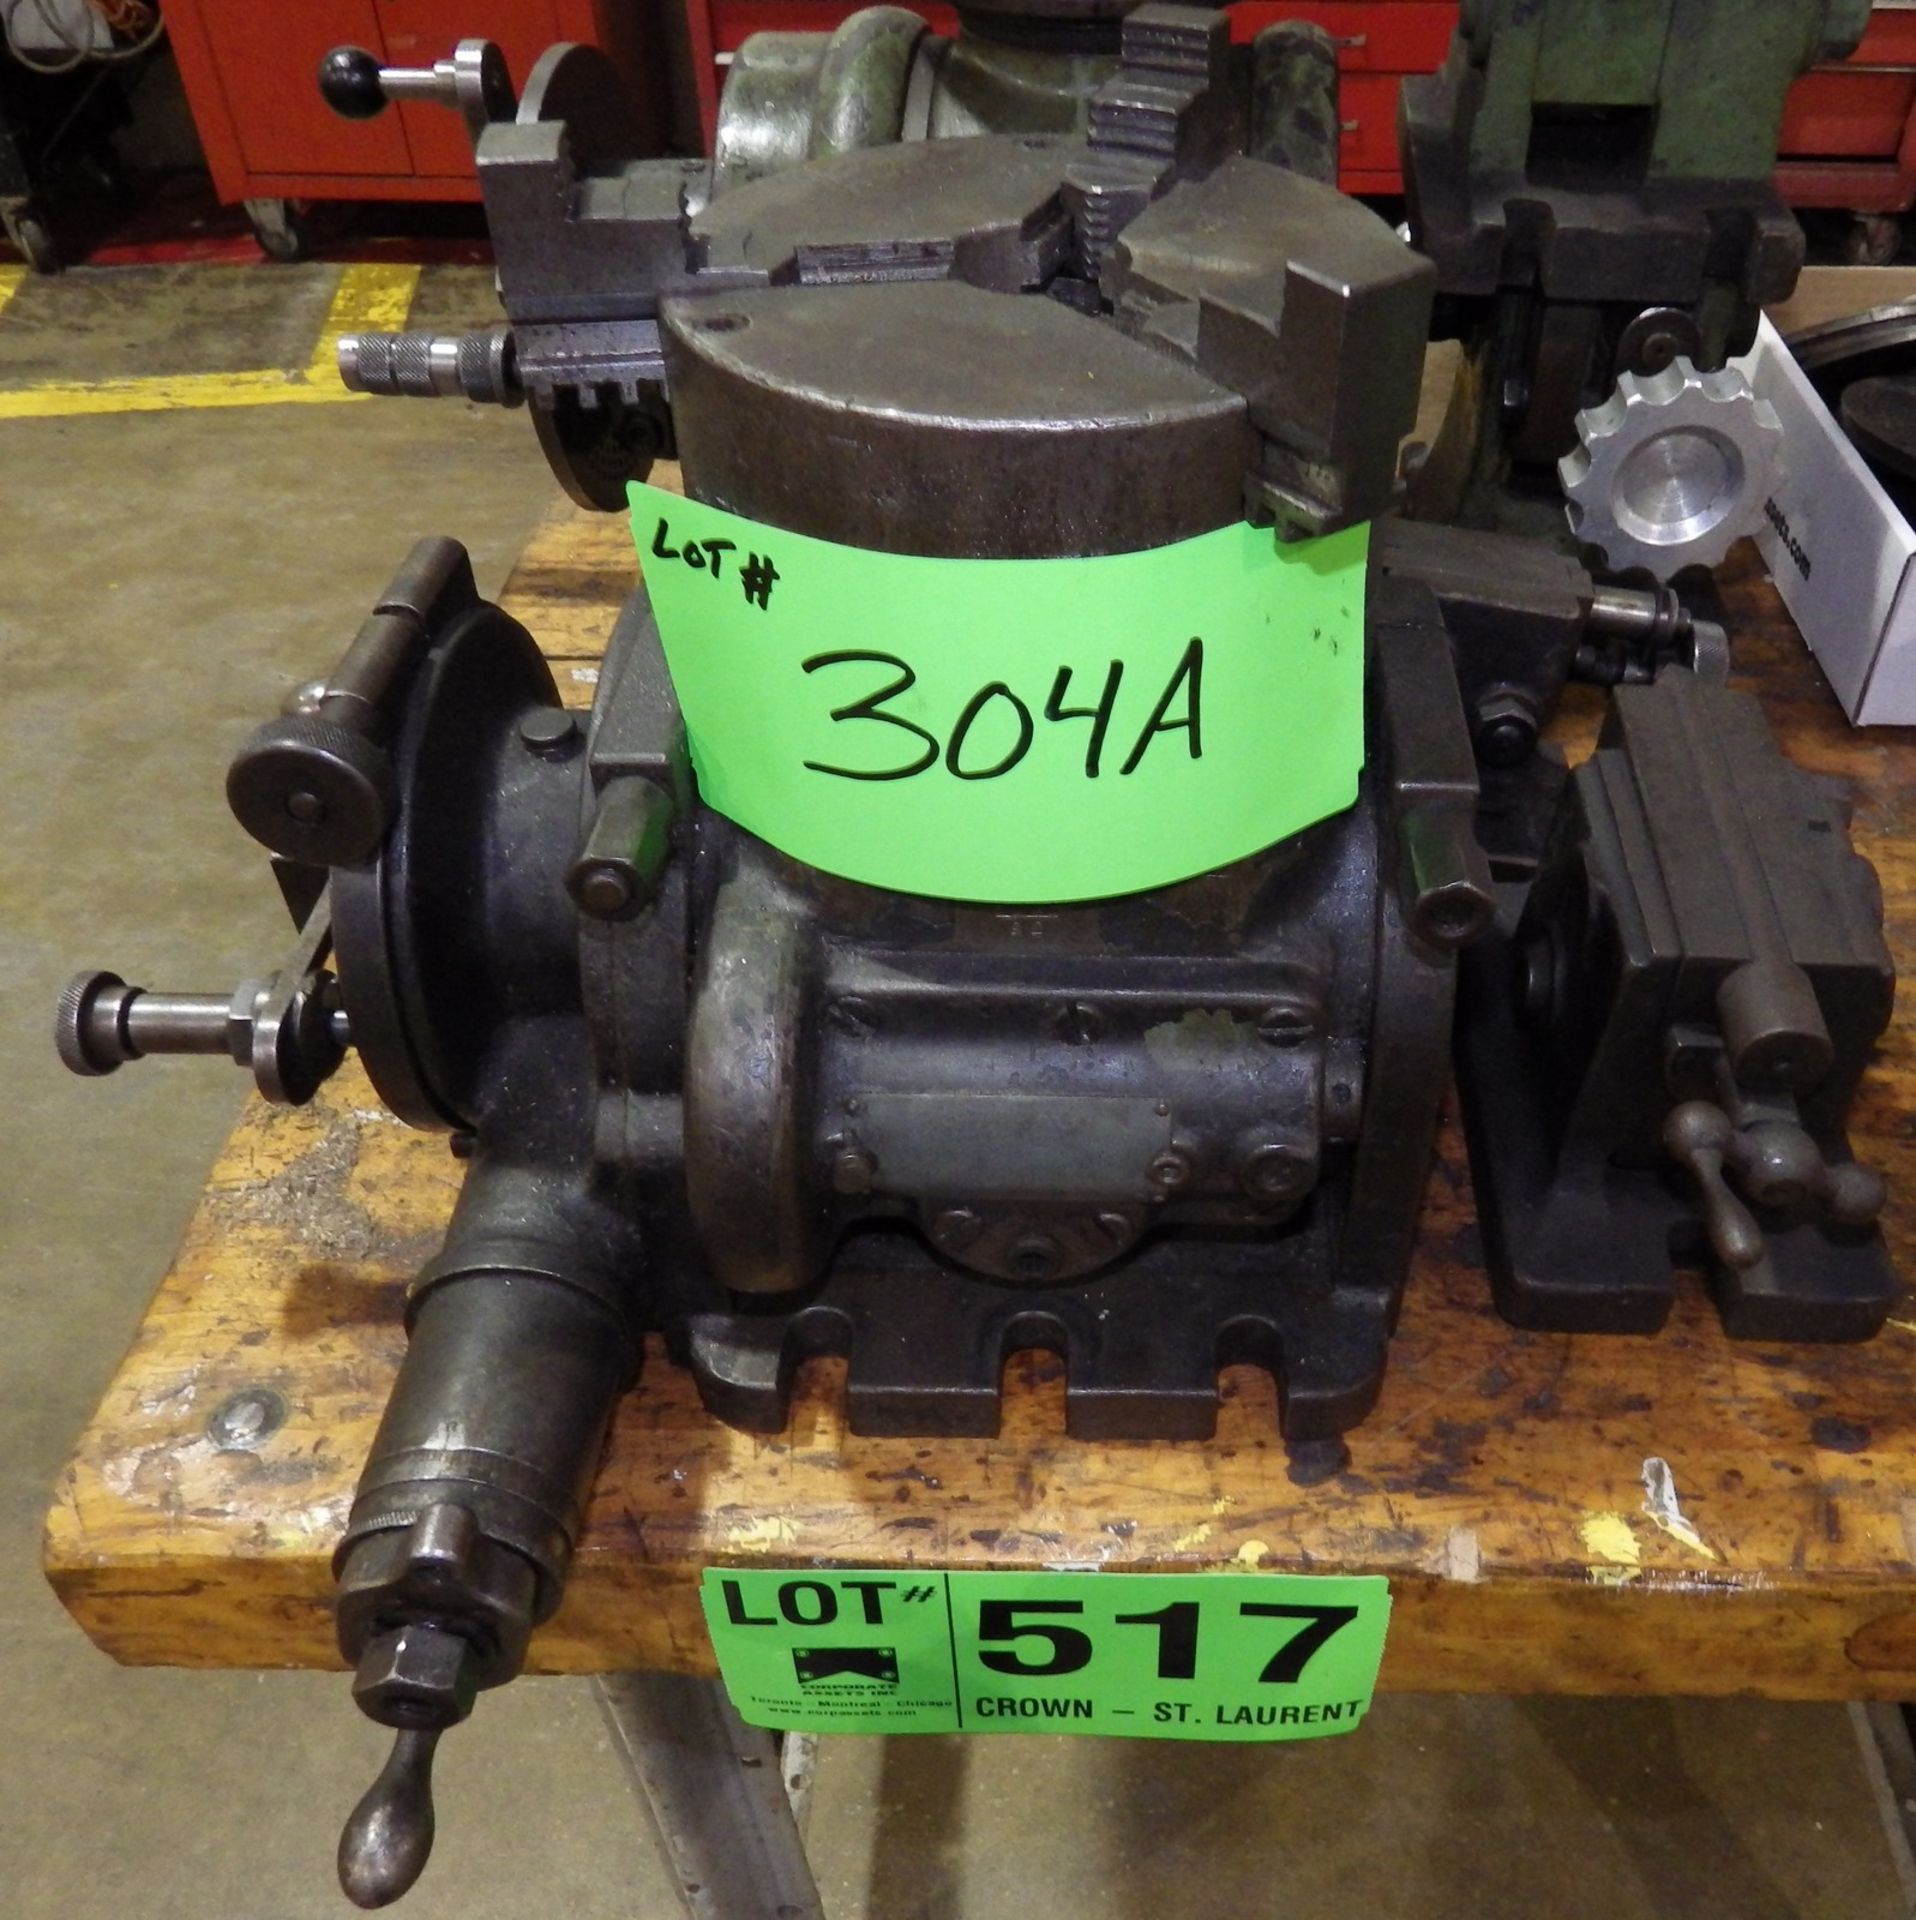 6" INDEXING HEAD WITH TAILSTOCK